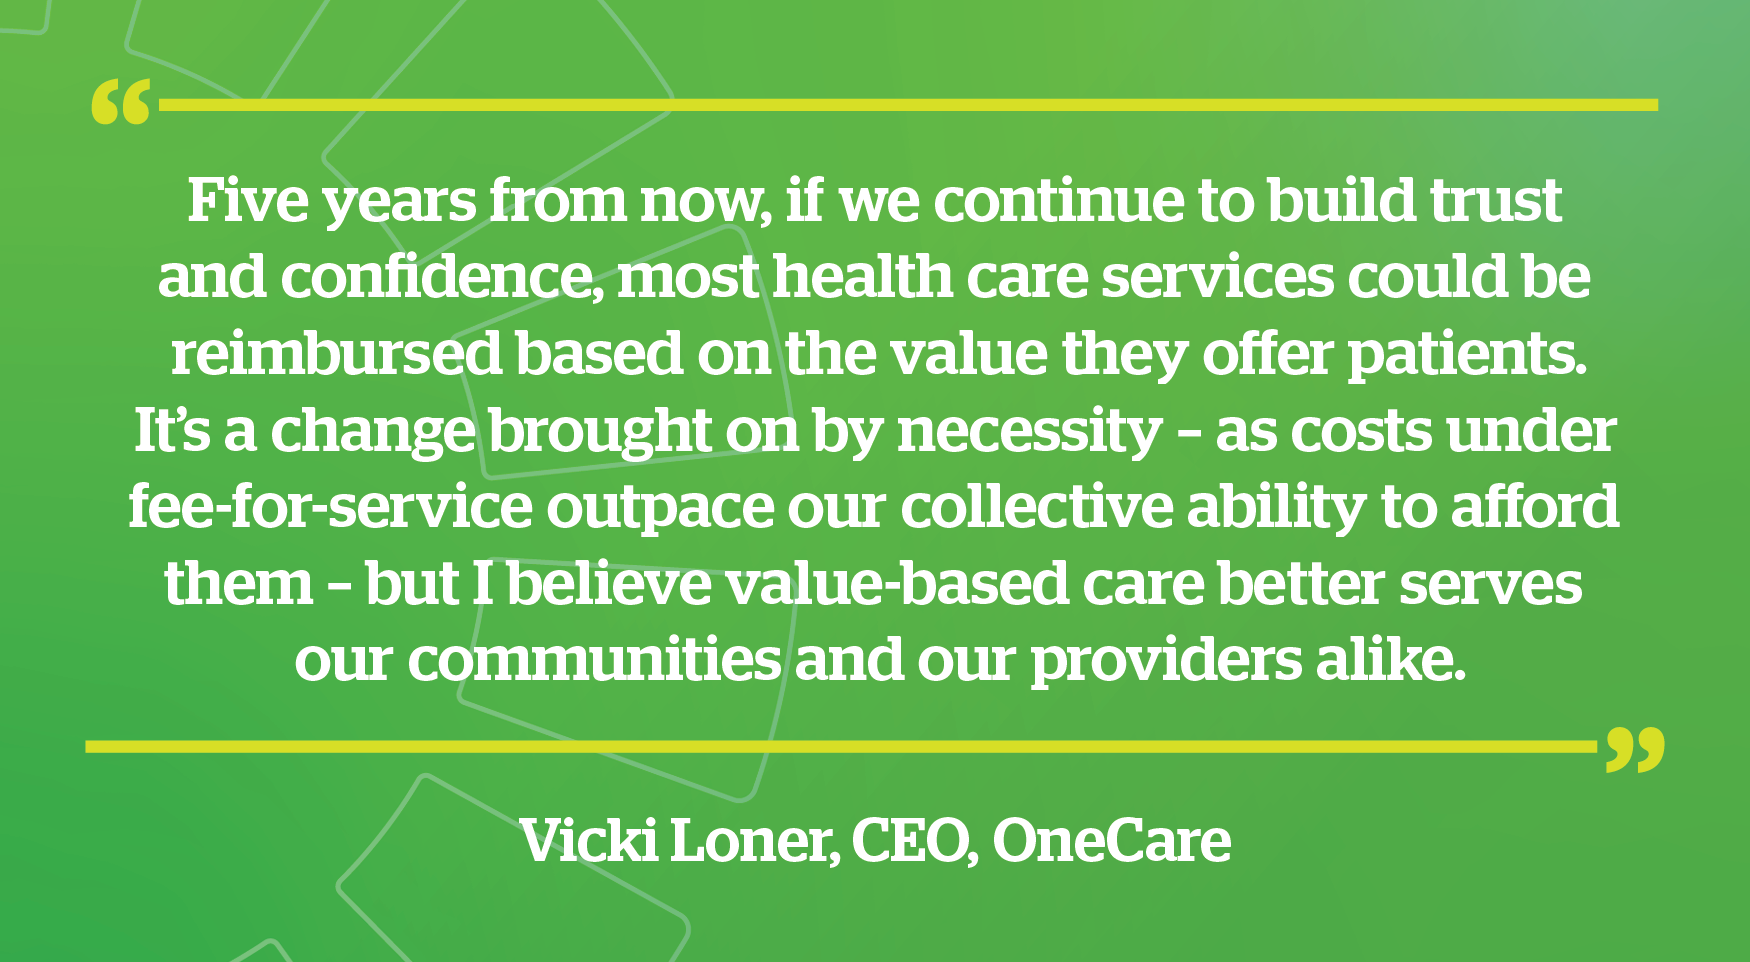 Vicki Loner CEO quote - Five years from now, if we continue to build trust and confidence, most health care services could be reimbursed based on the value they offer patients. It’s a change brought on by necessity – as costs under fee-for-service outpace our collective ability to afford them – but I believe value-based care better serves our communities and our providers alike.